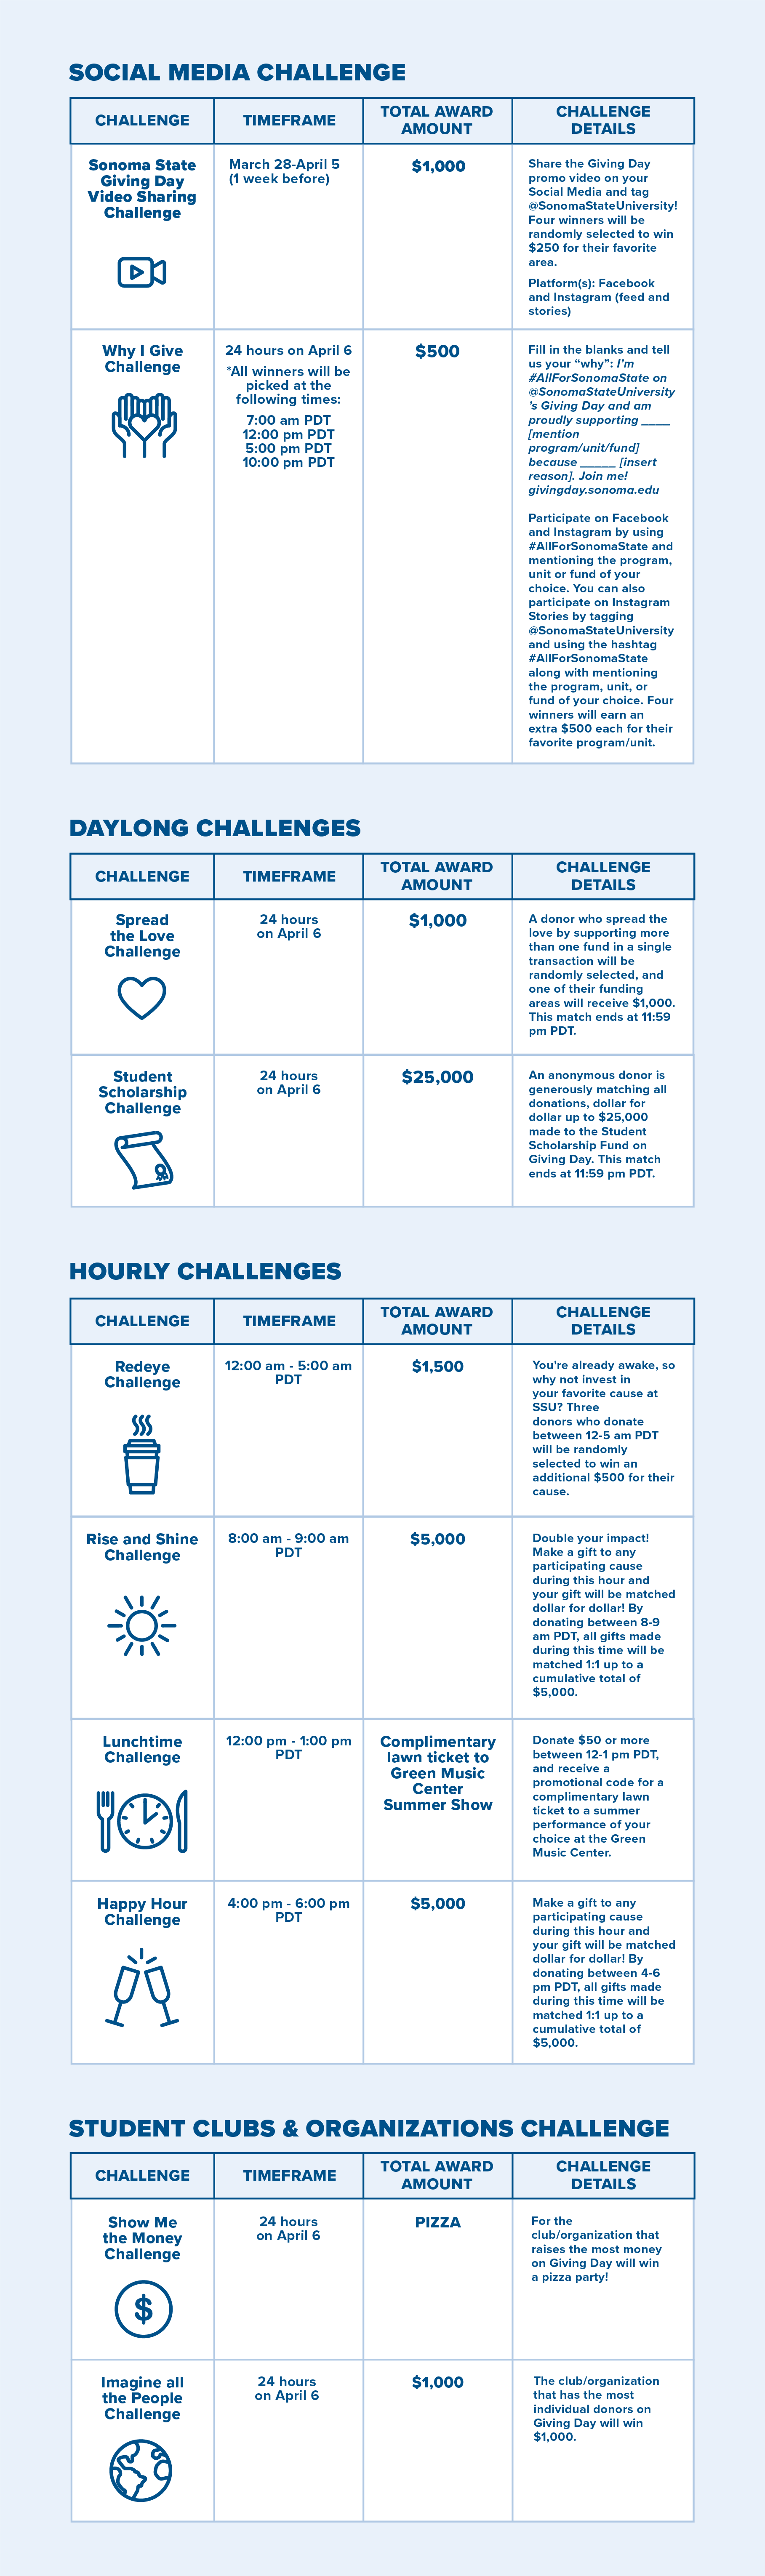 Giving Day Challenges